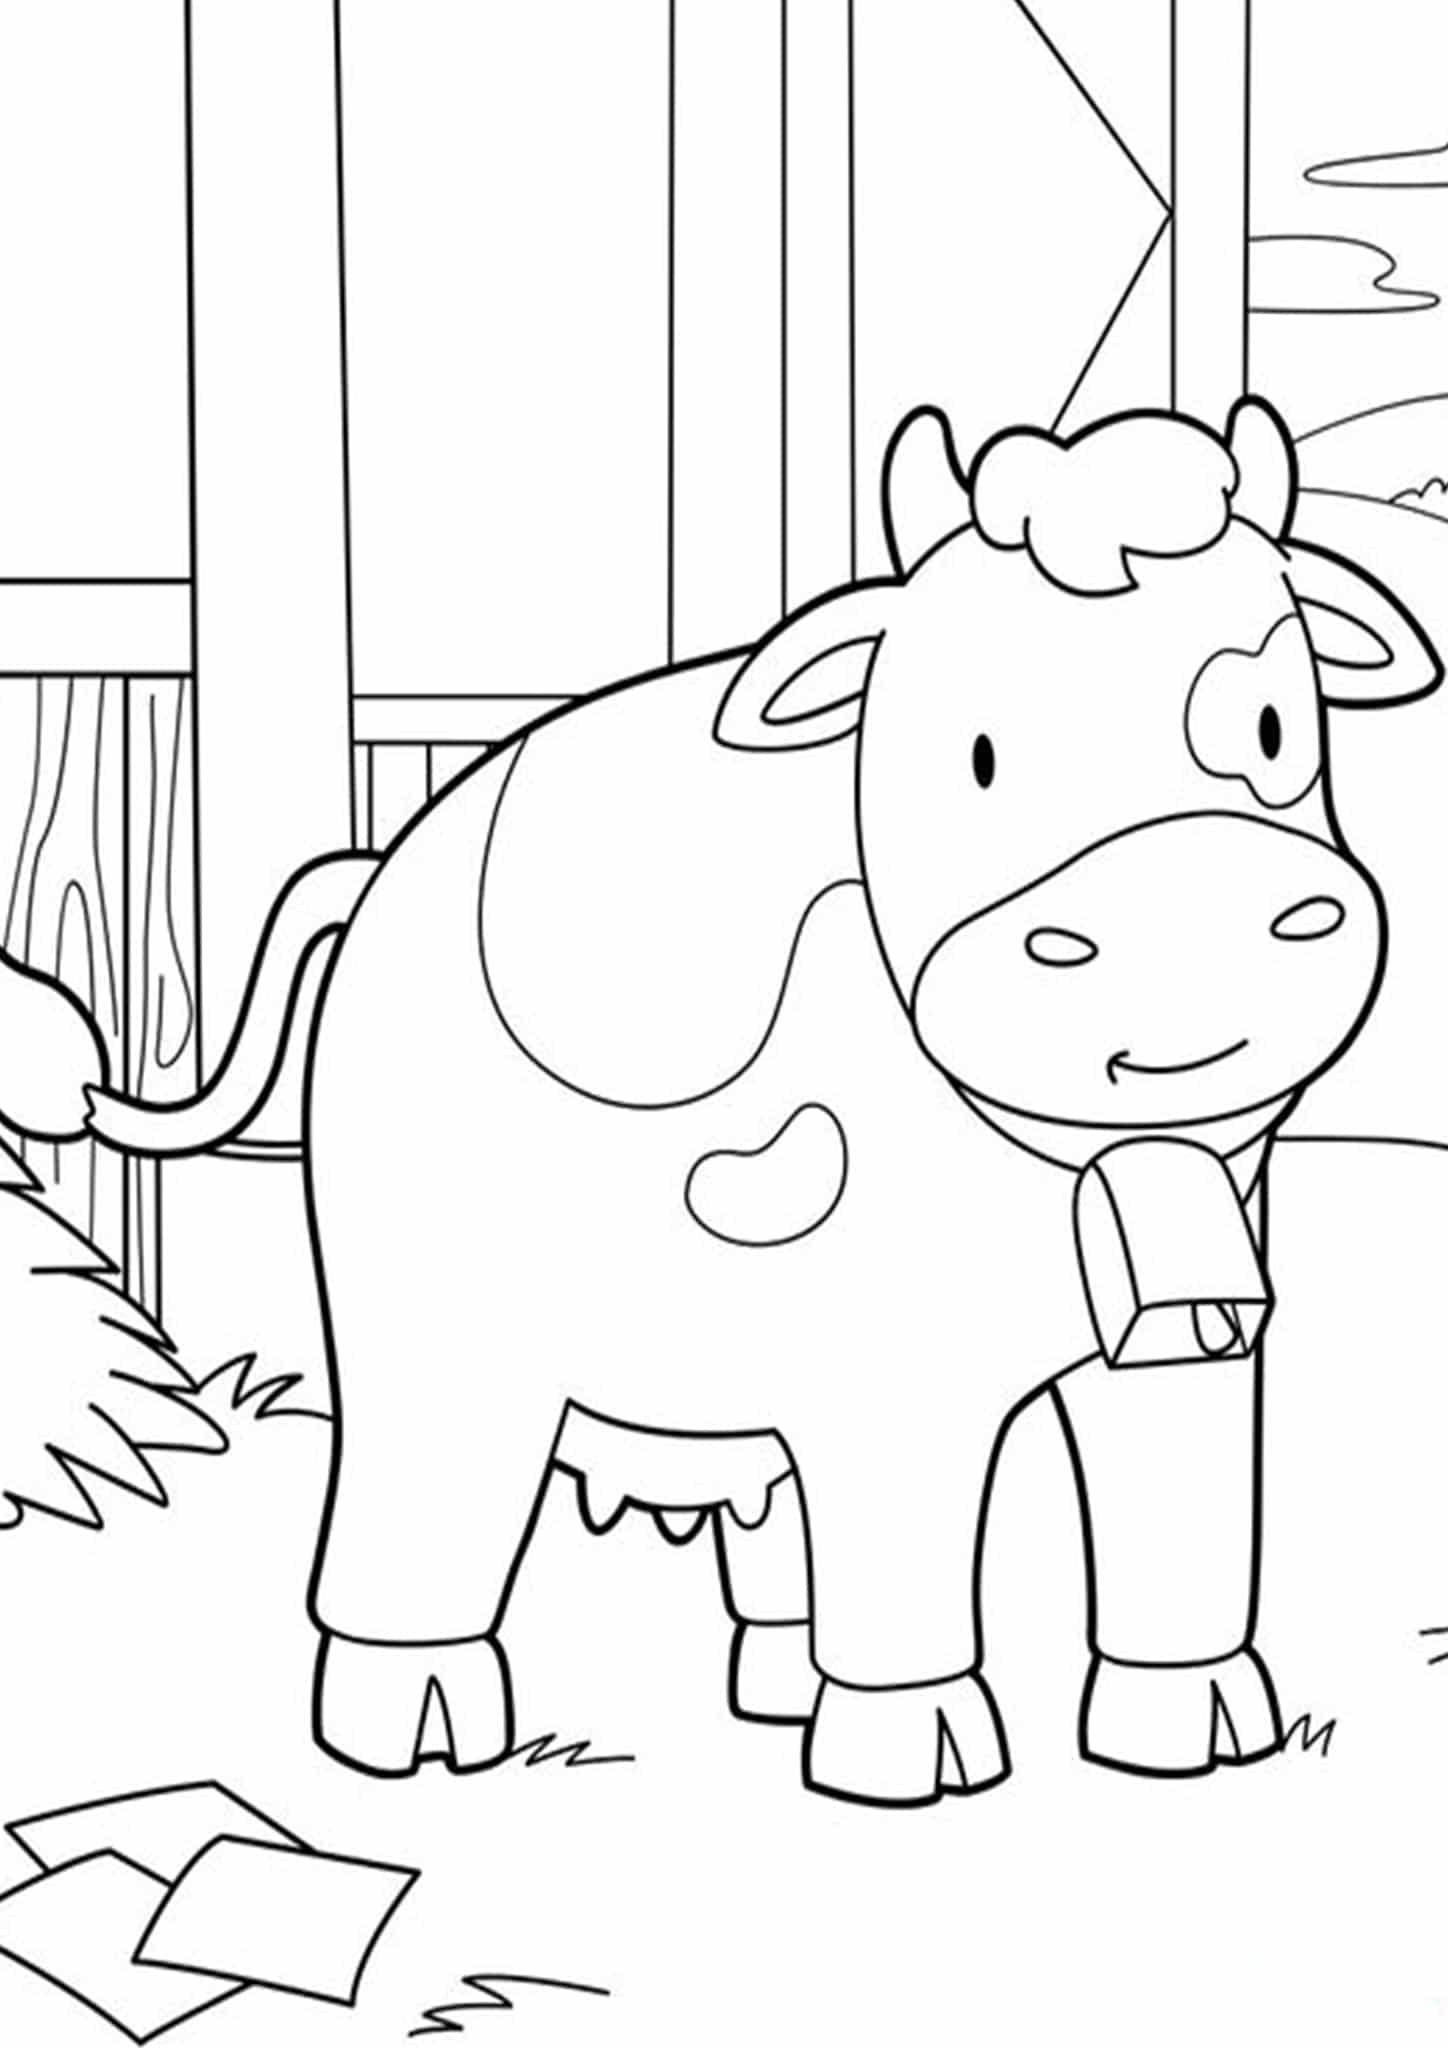 cow-pictures-to-color-crafts-actvities-and-worksheets-for-preschool